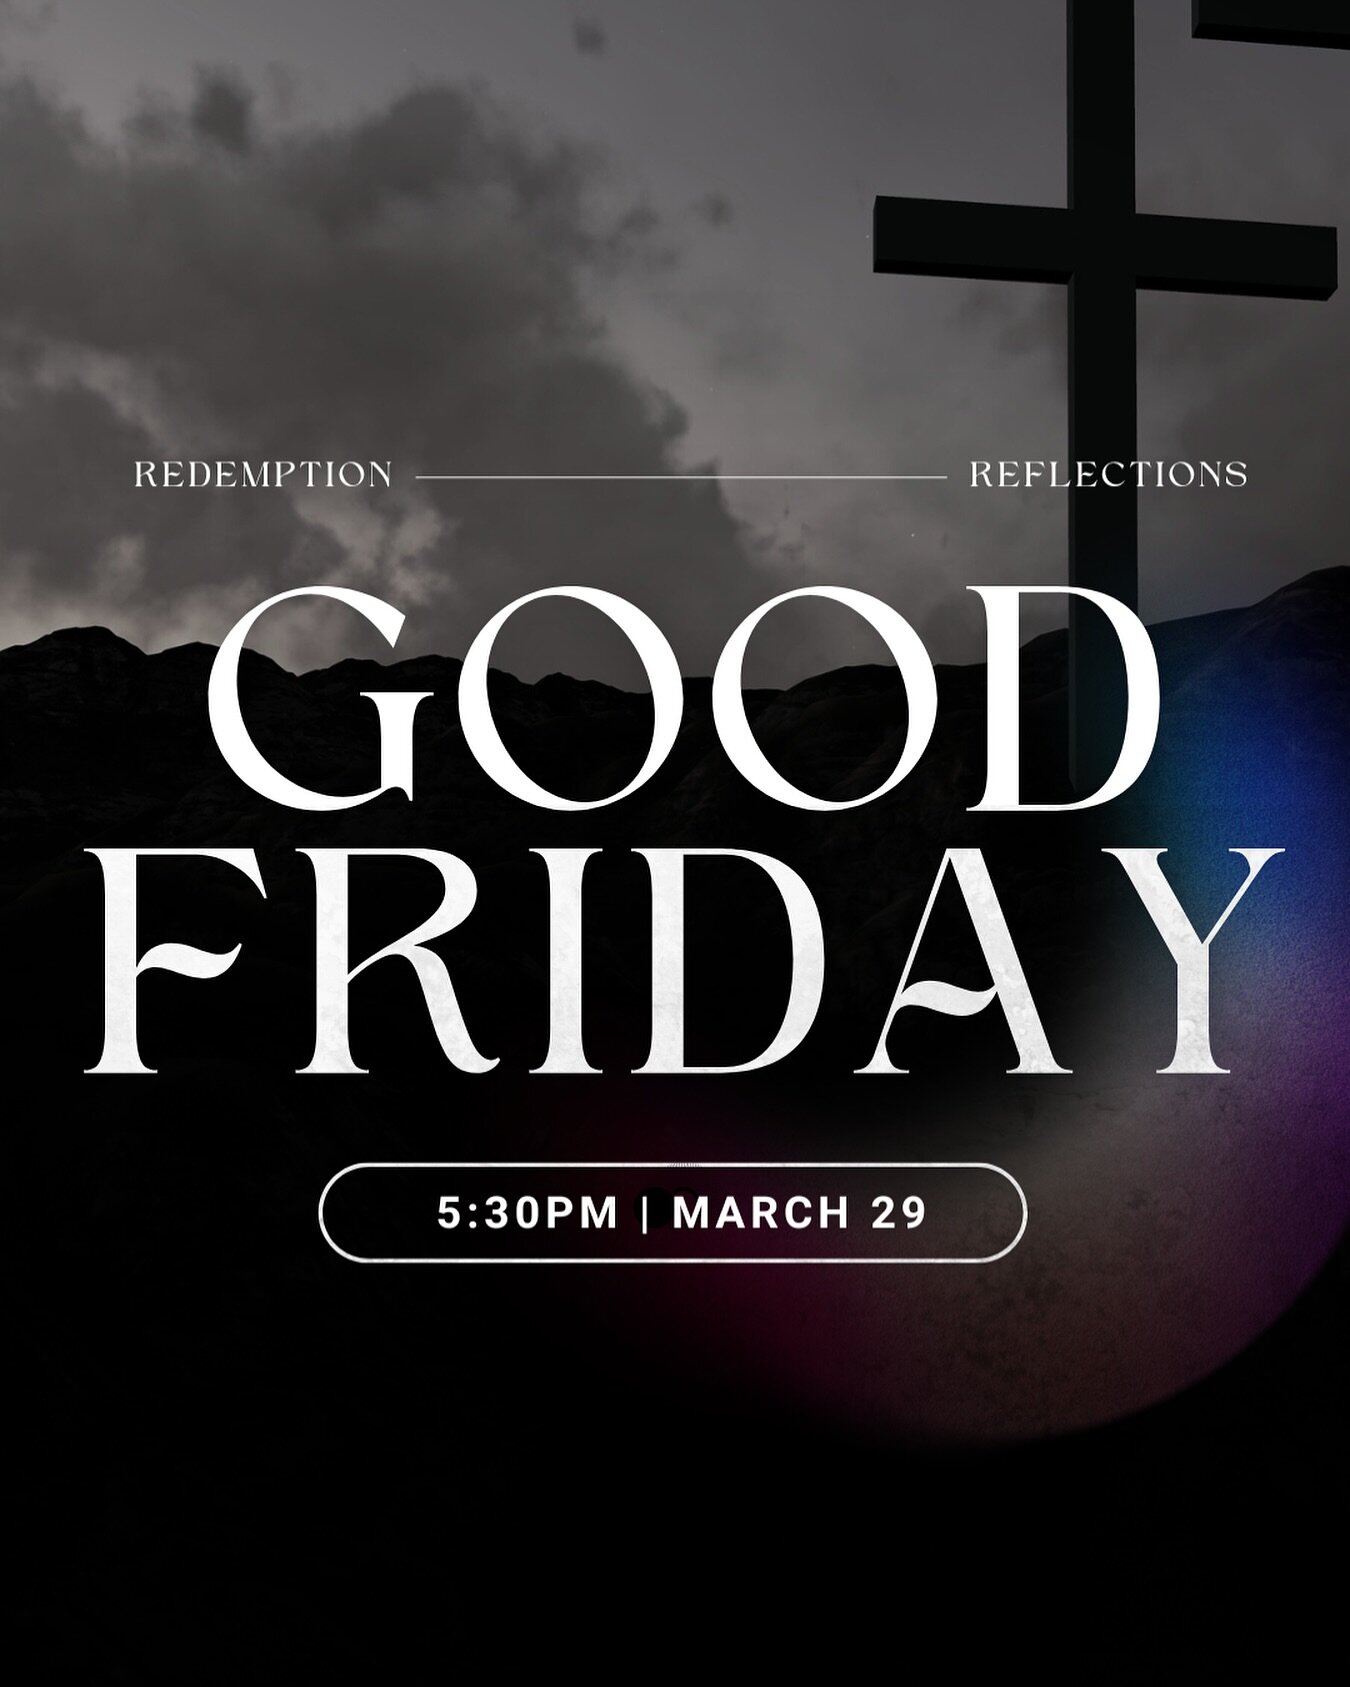 Join us tomorrow at 5:30pm as we reflect on the sacrifice Jesus made on the cross and take communion together.